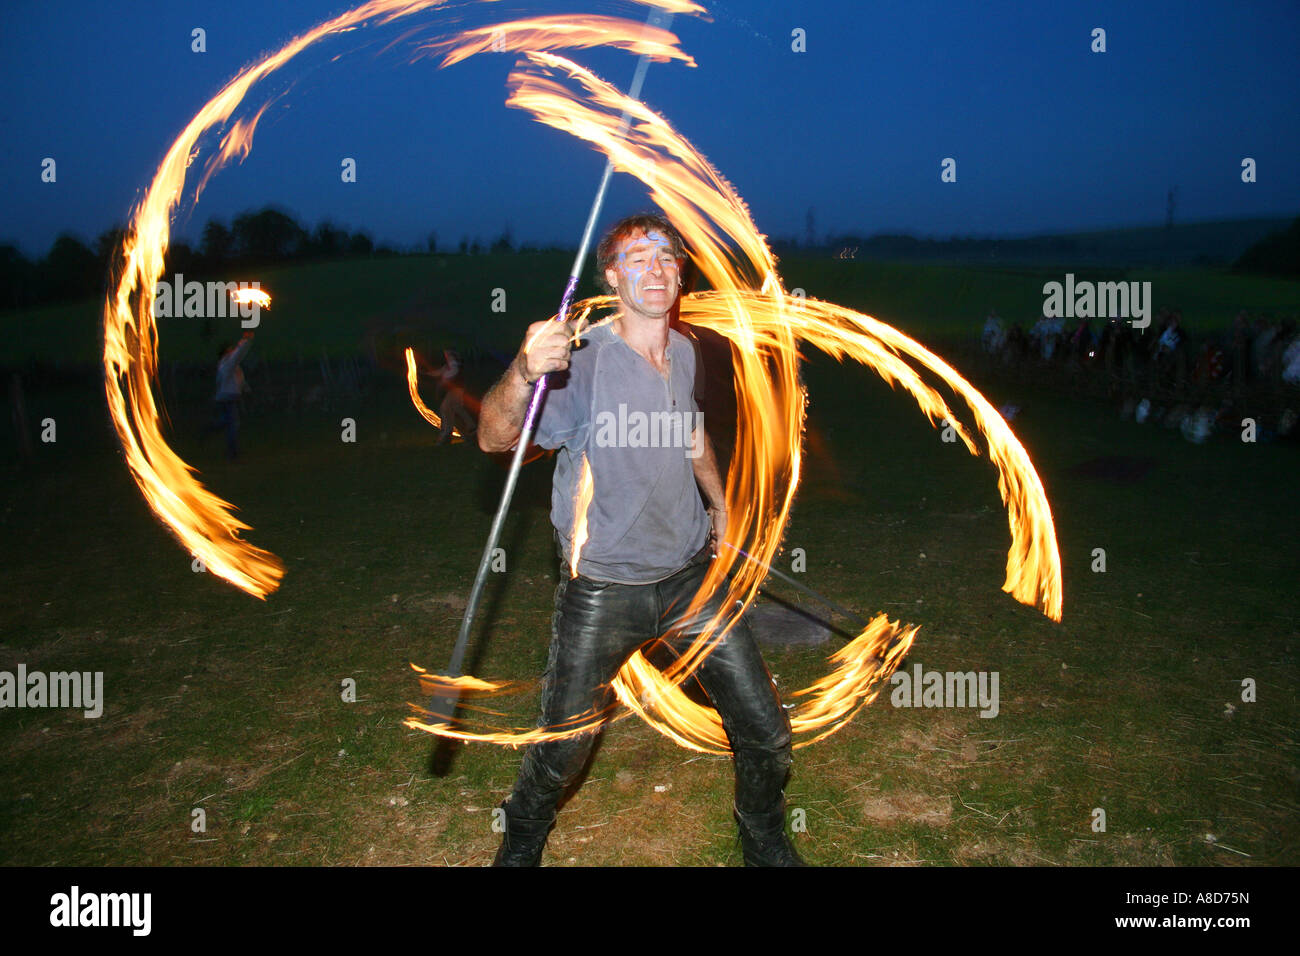 A flame acrobat performing at the Beltane festival at Butser Farm U K